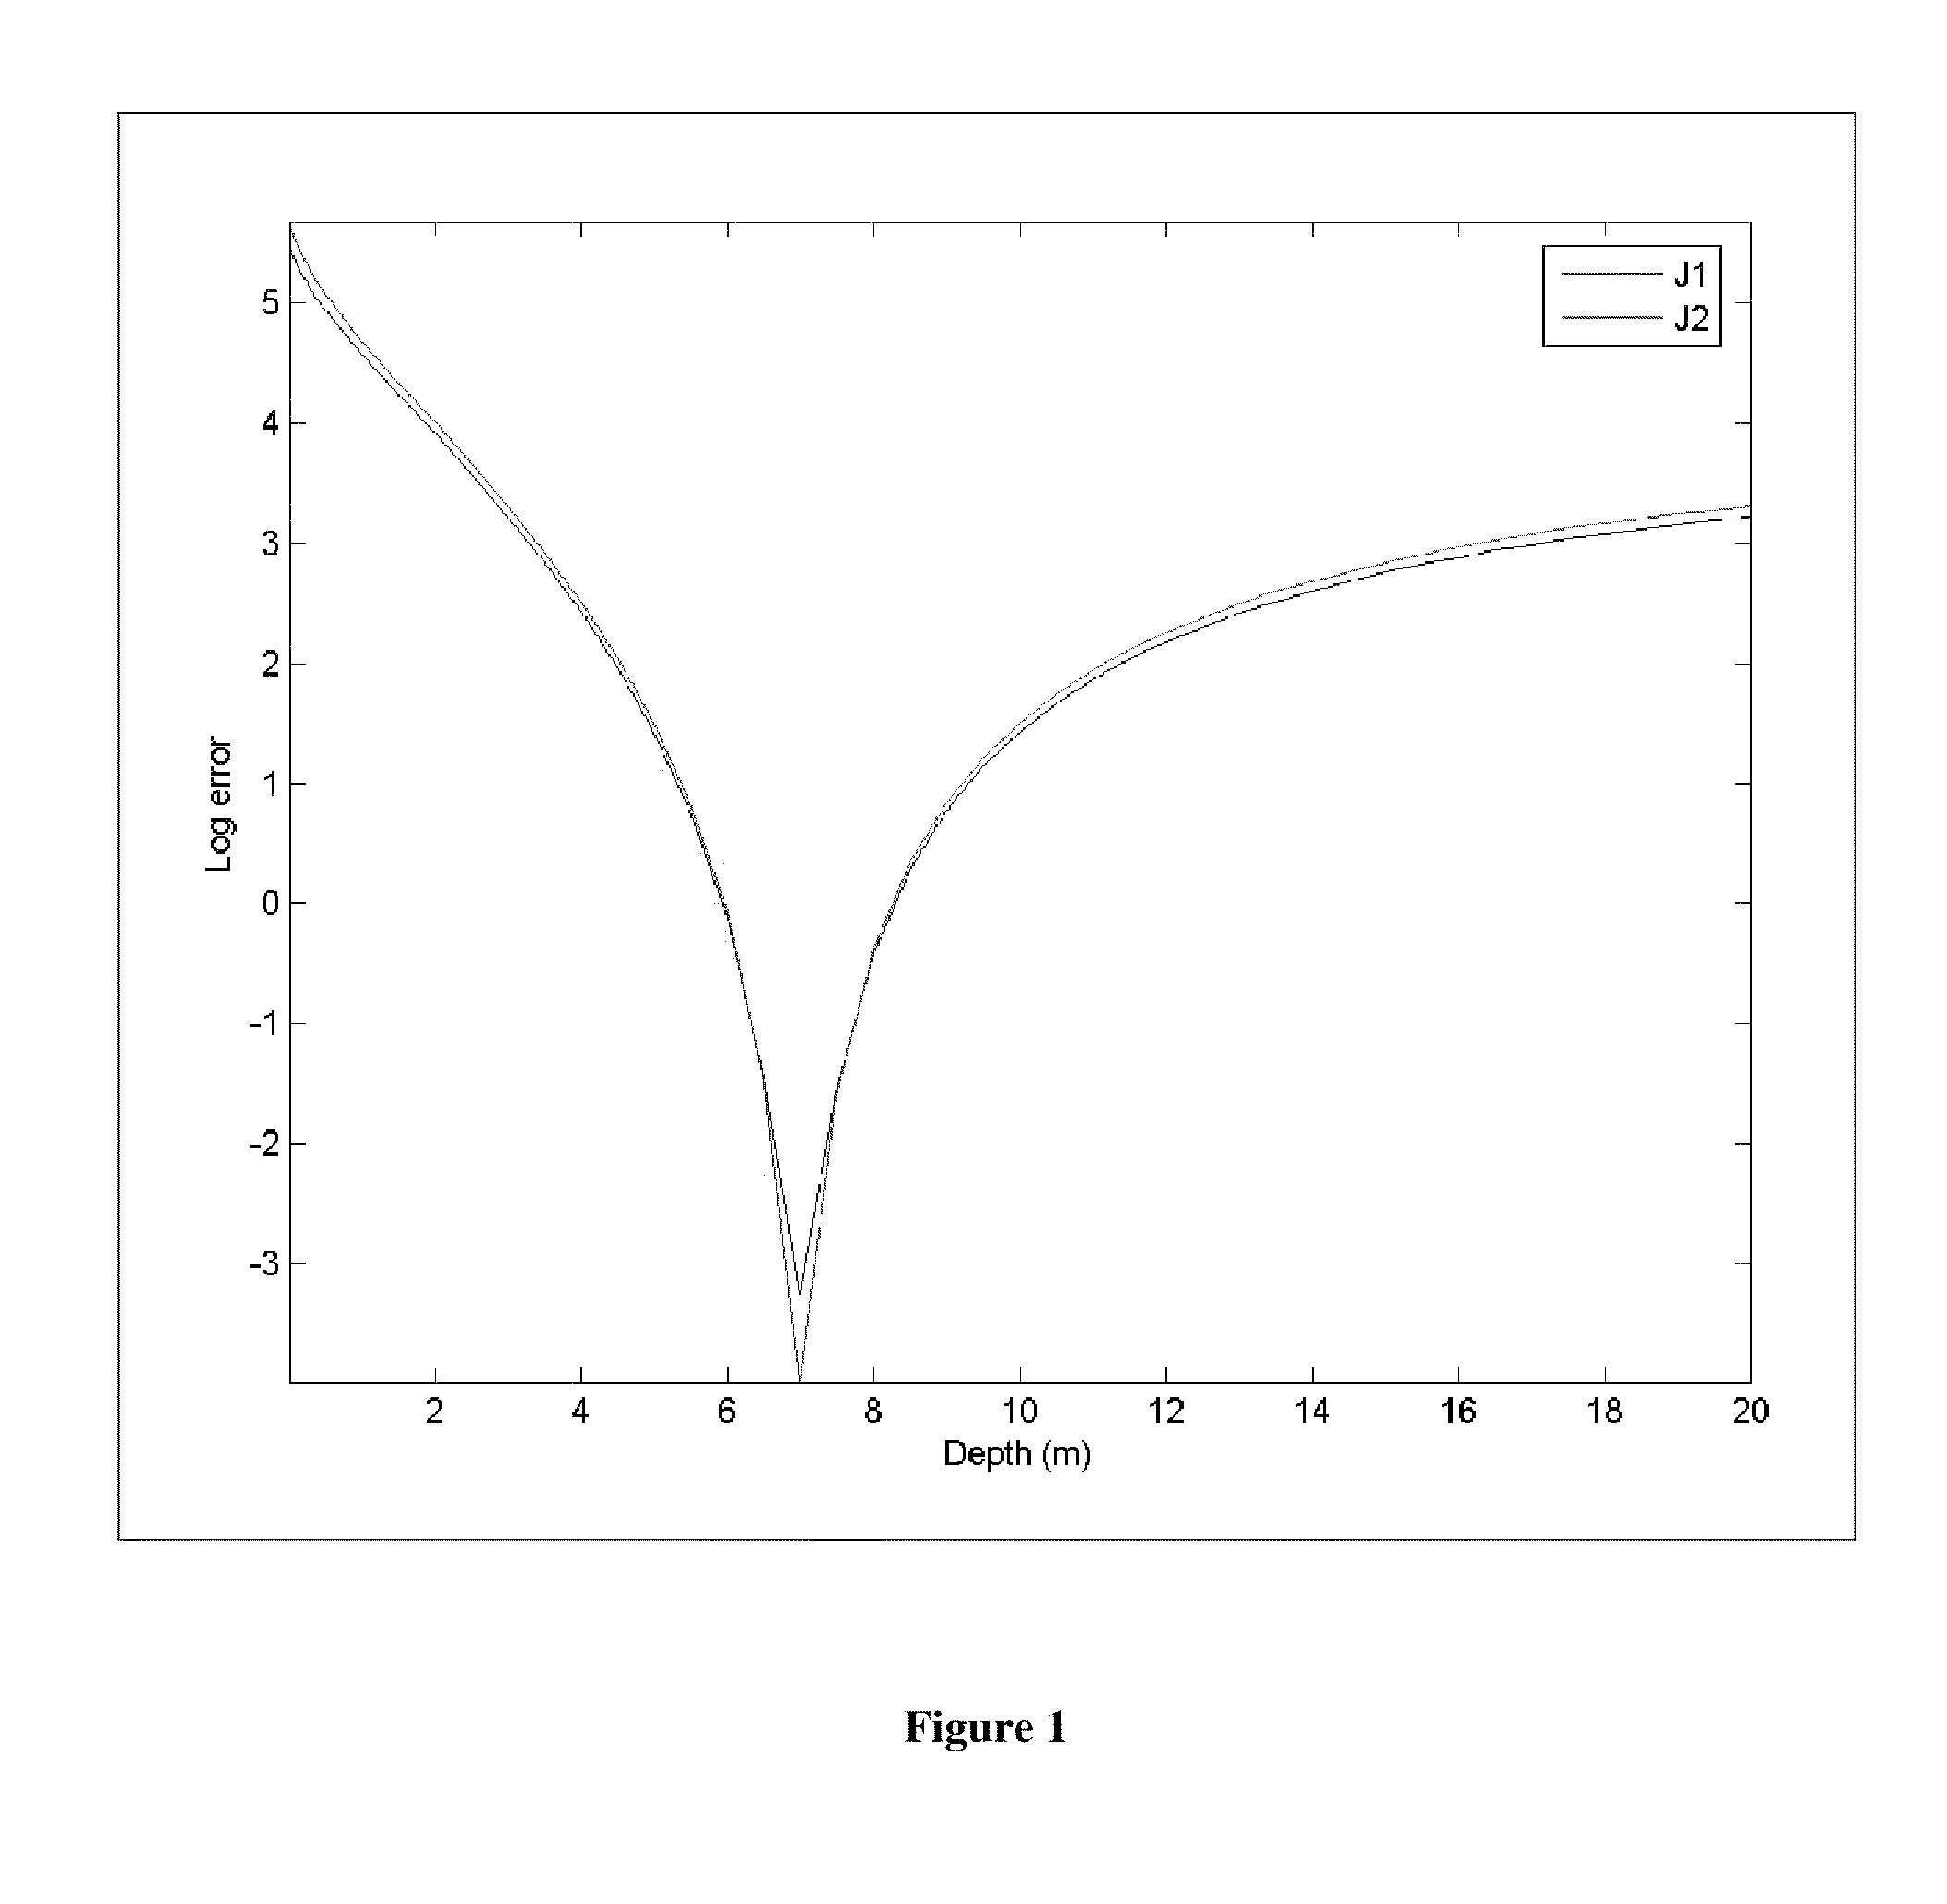 Methods for mapping depth and surface current